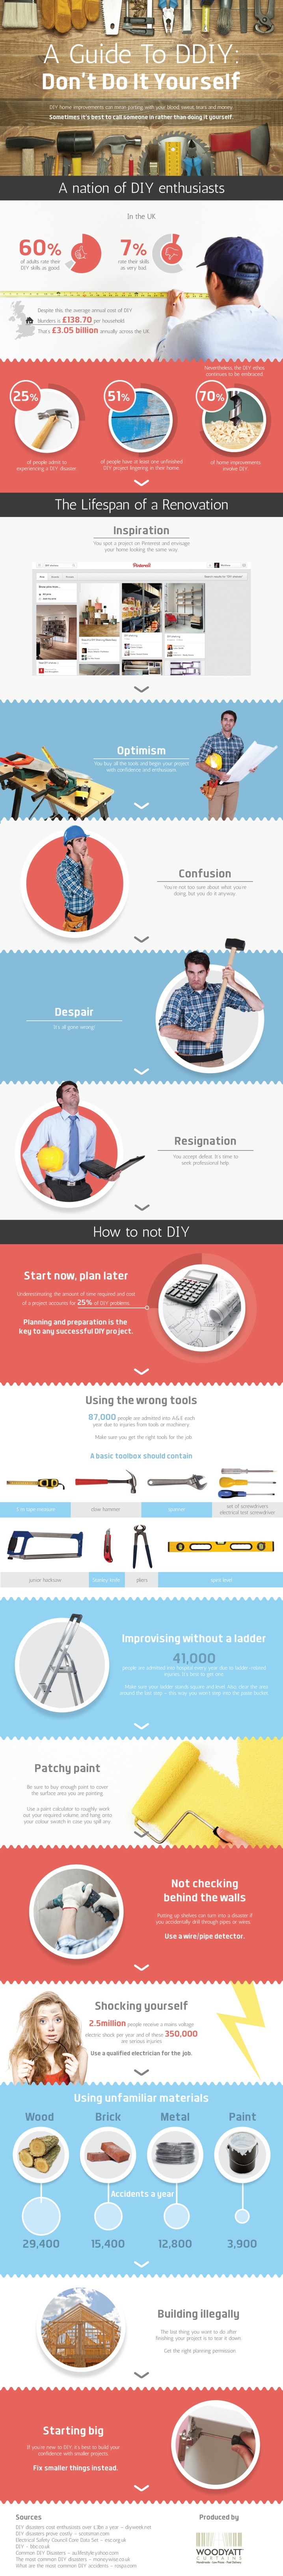 Why Not Do It Yourself-Infographic